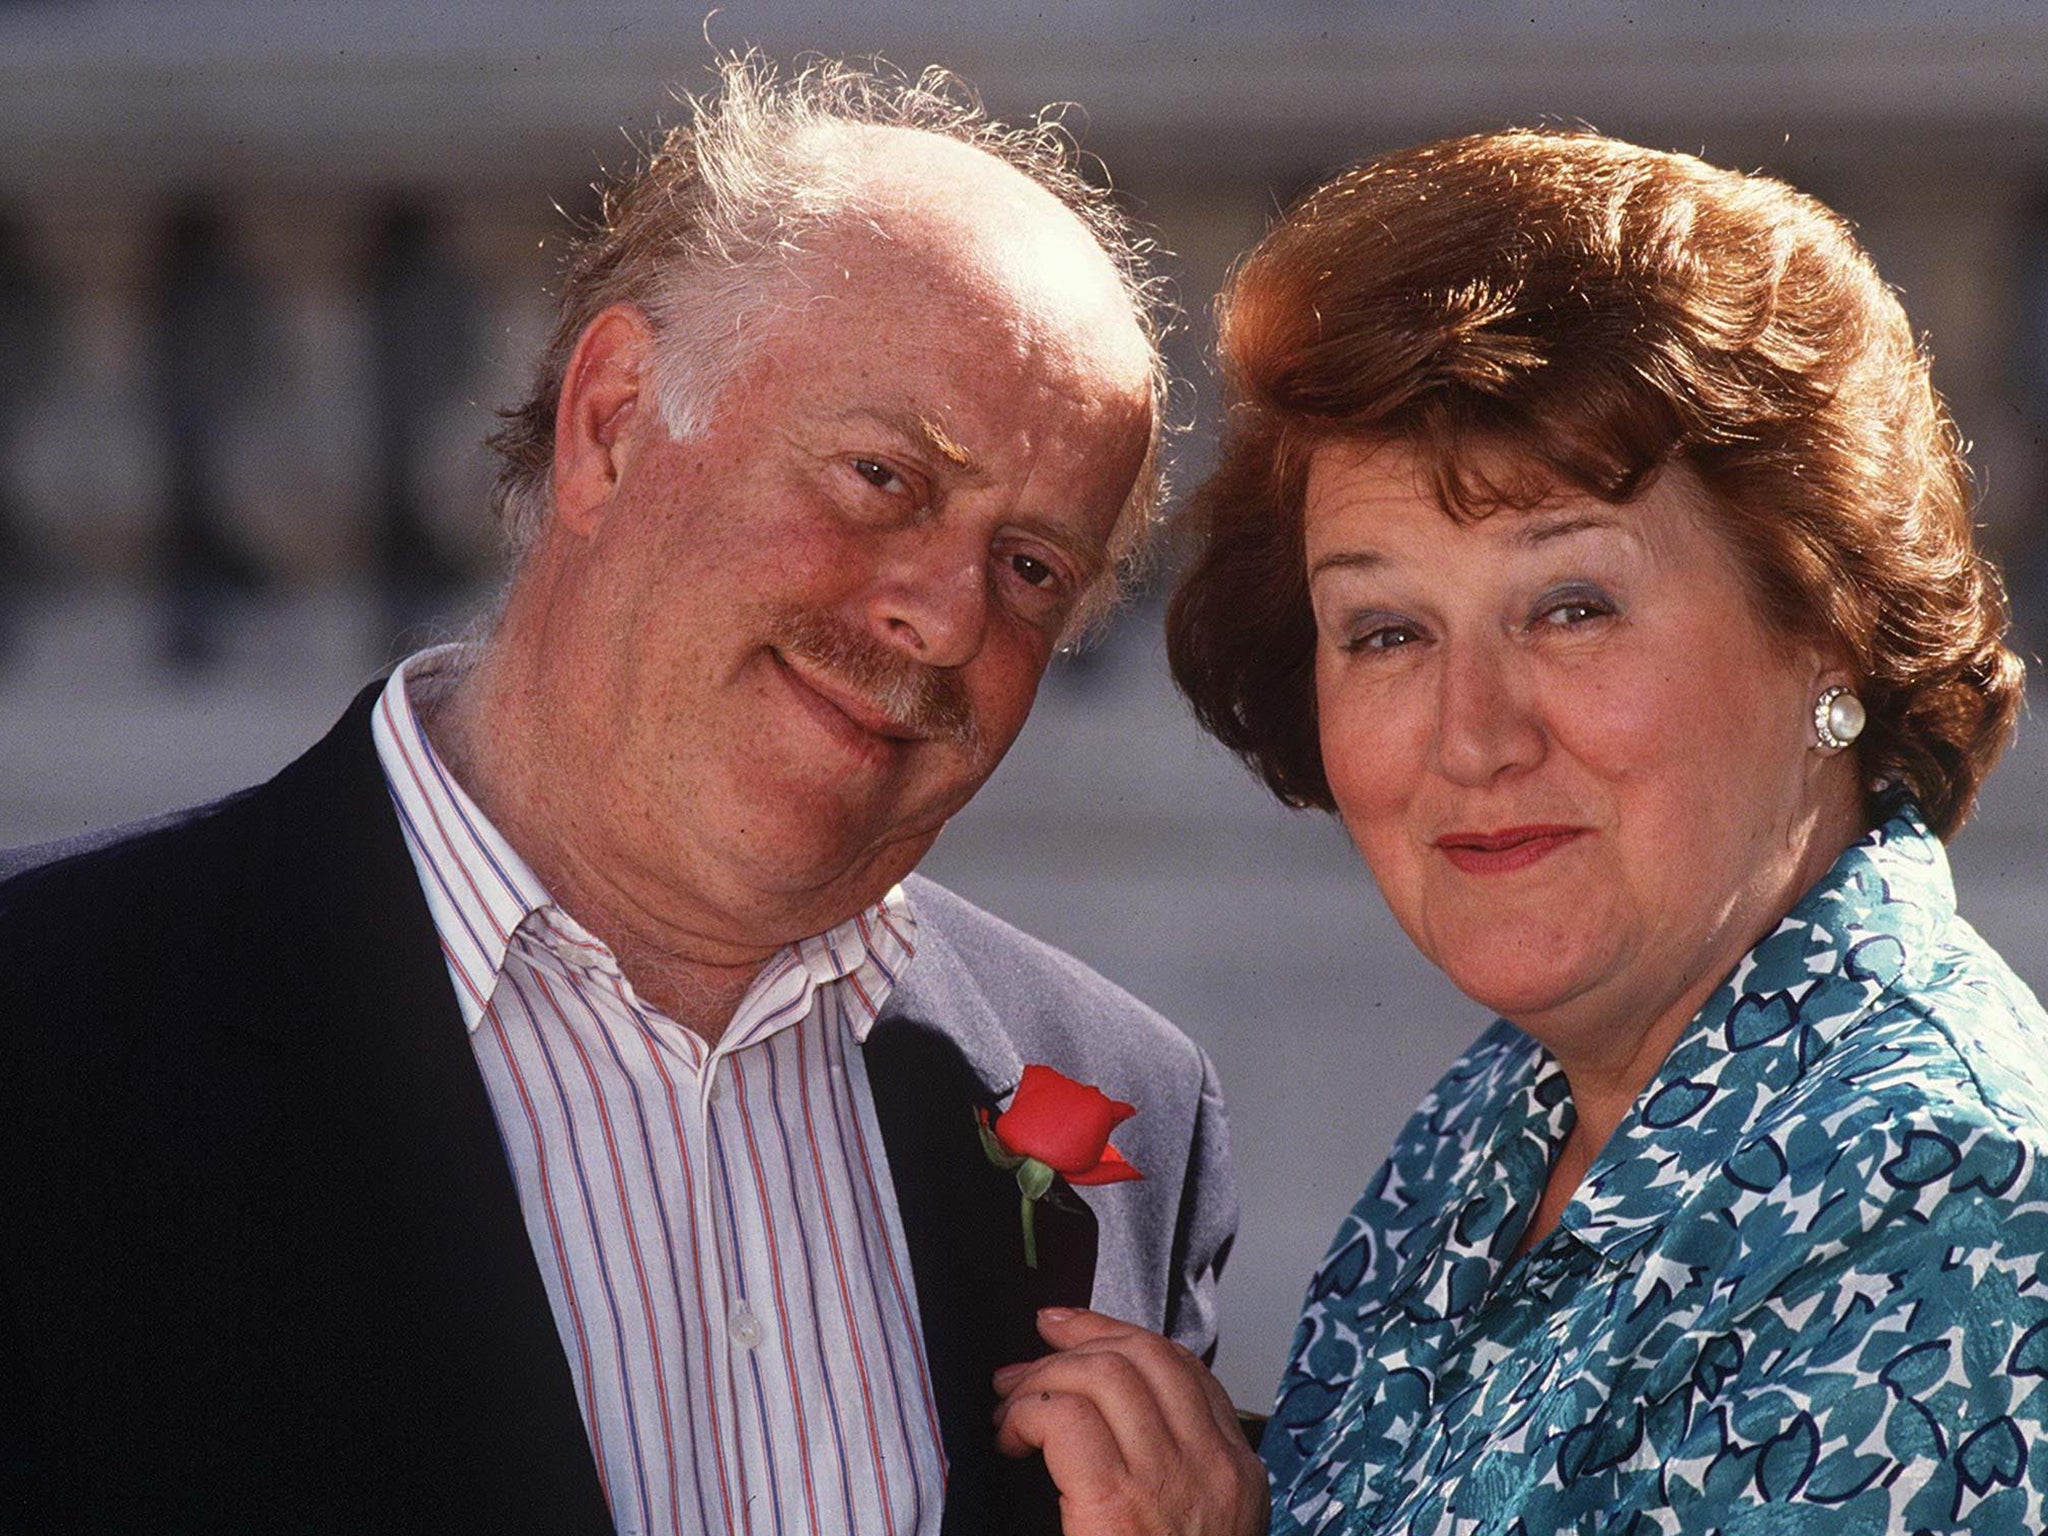 Clive Swift was best known for playing the long-suffering husband of Hyacinth Bucket in ‘Keeping up Appearances’